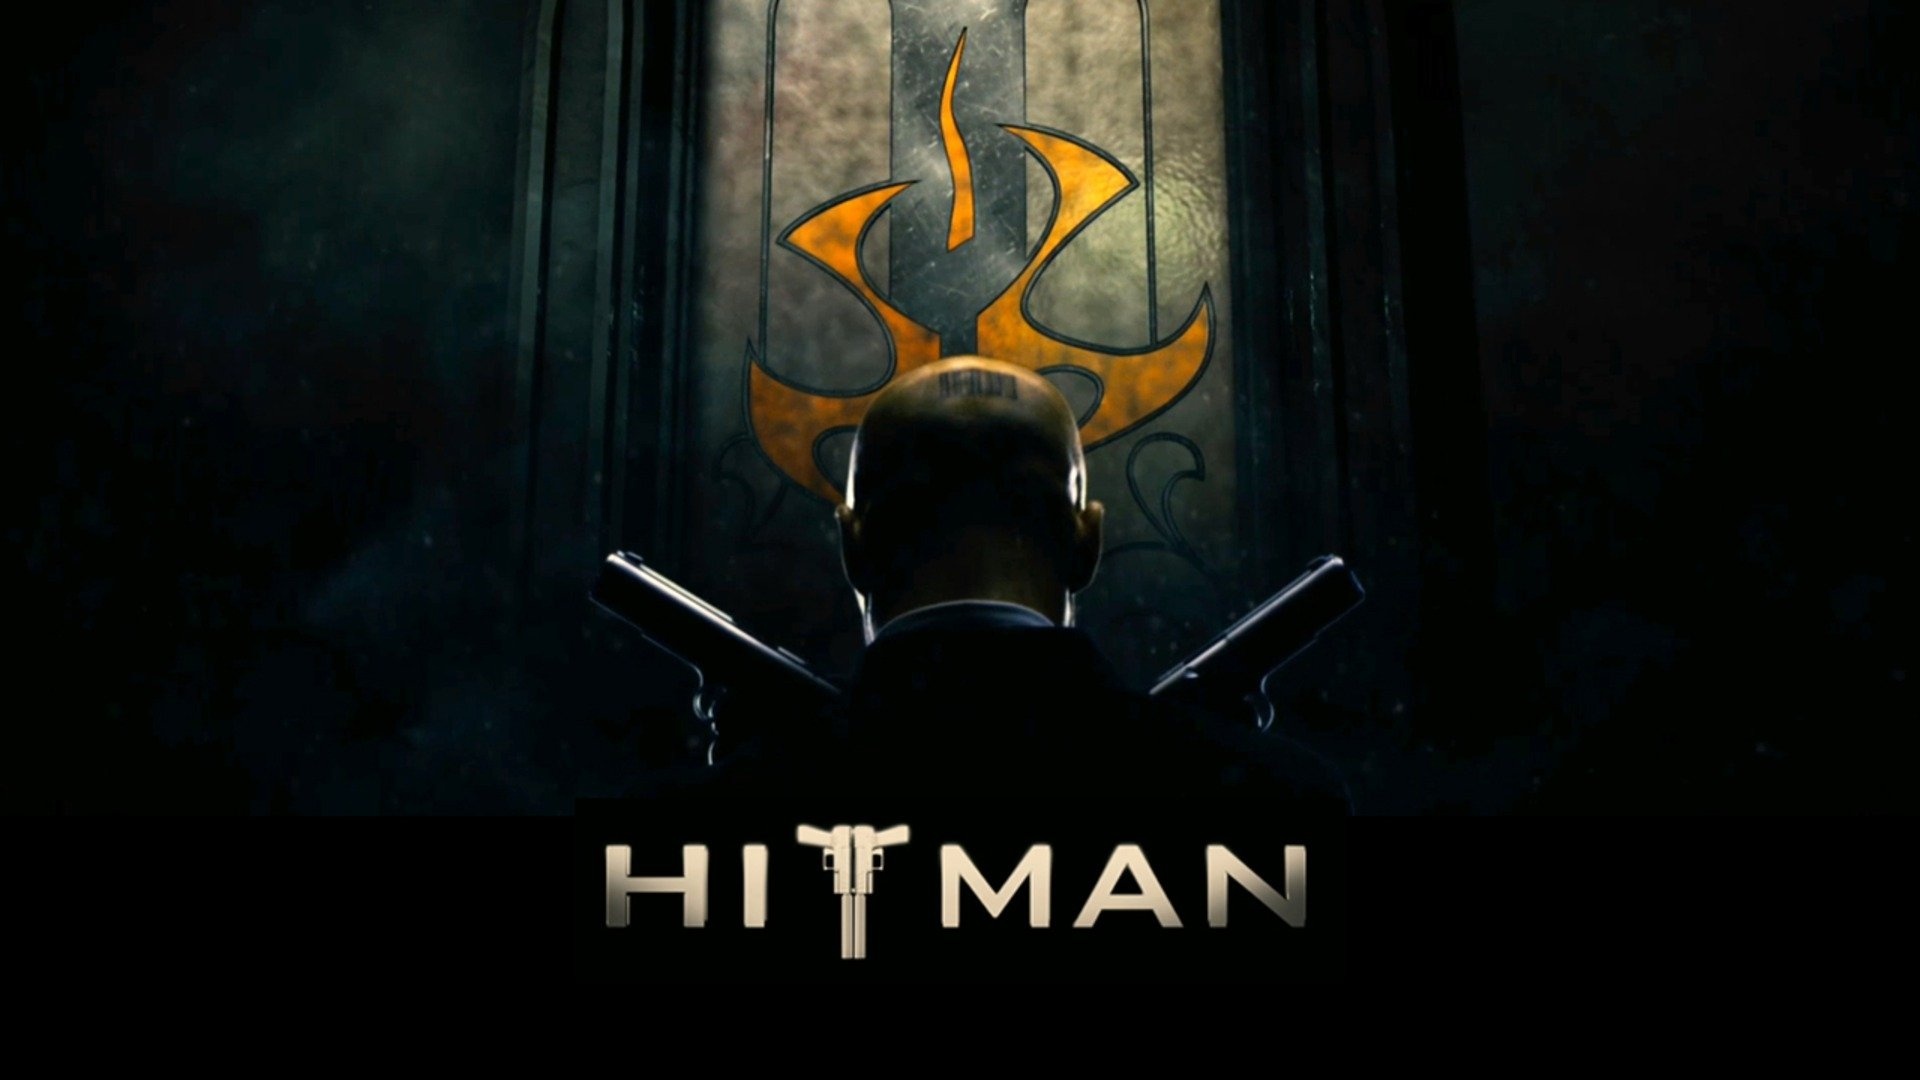 Hitman logo, Agent 47, Stealth action, Video game wallpapers, 1920x1080 Full HD Desktop